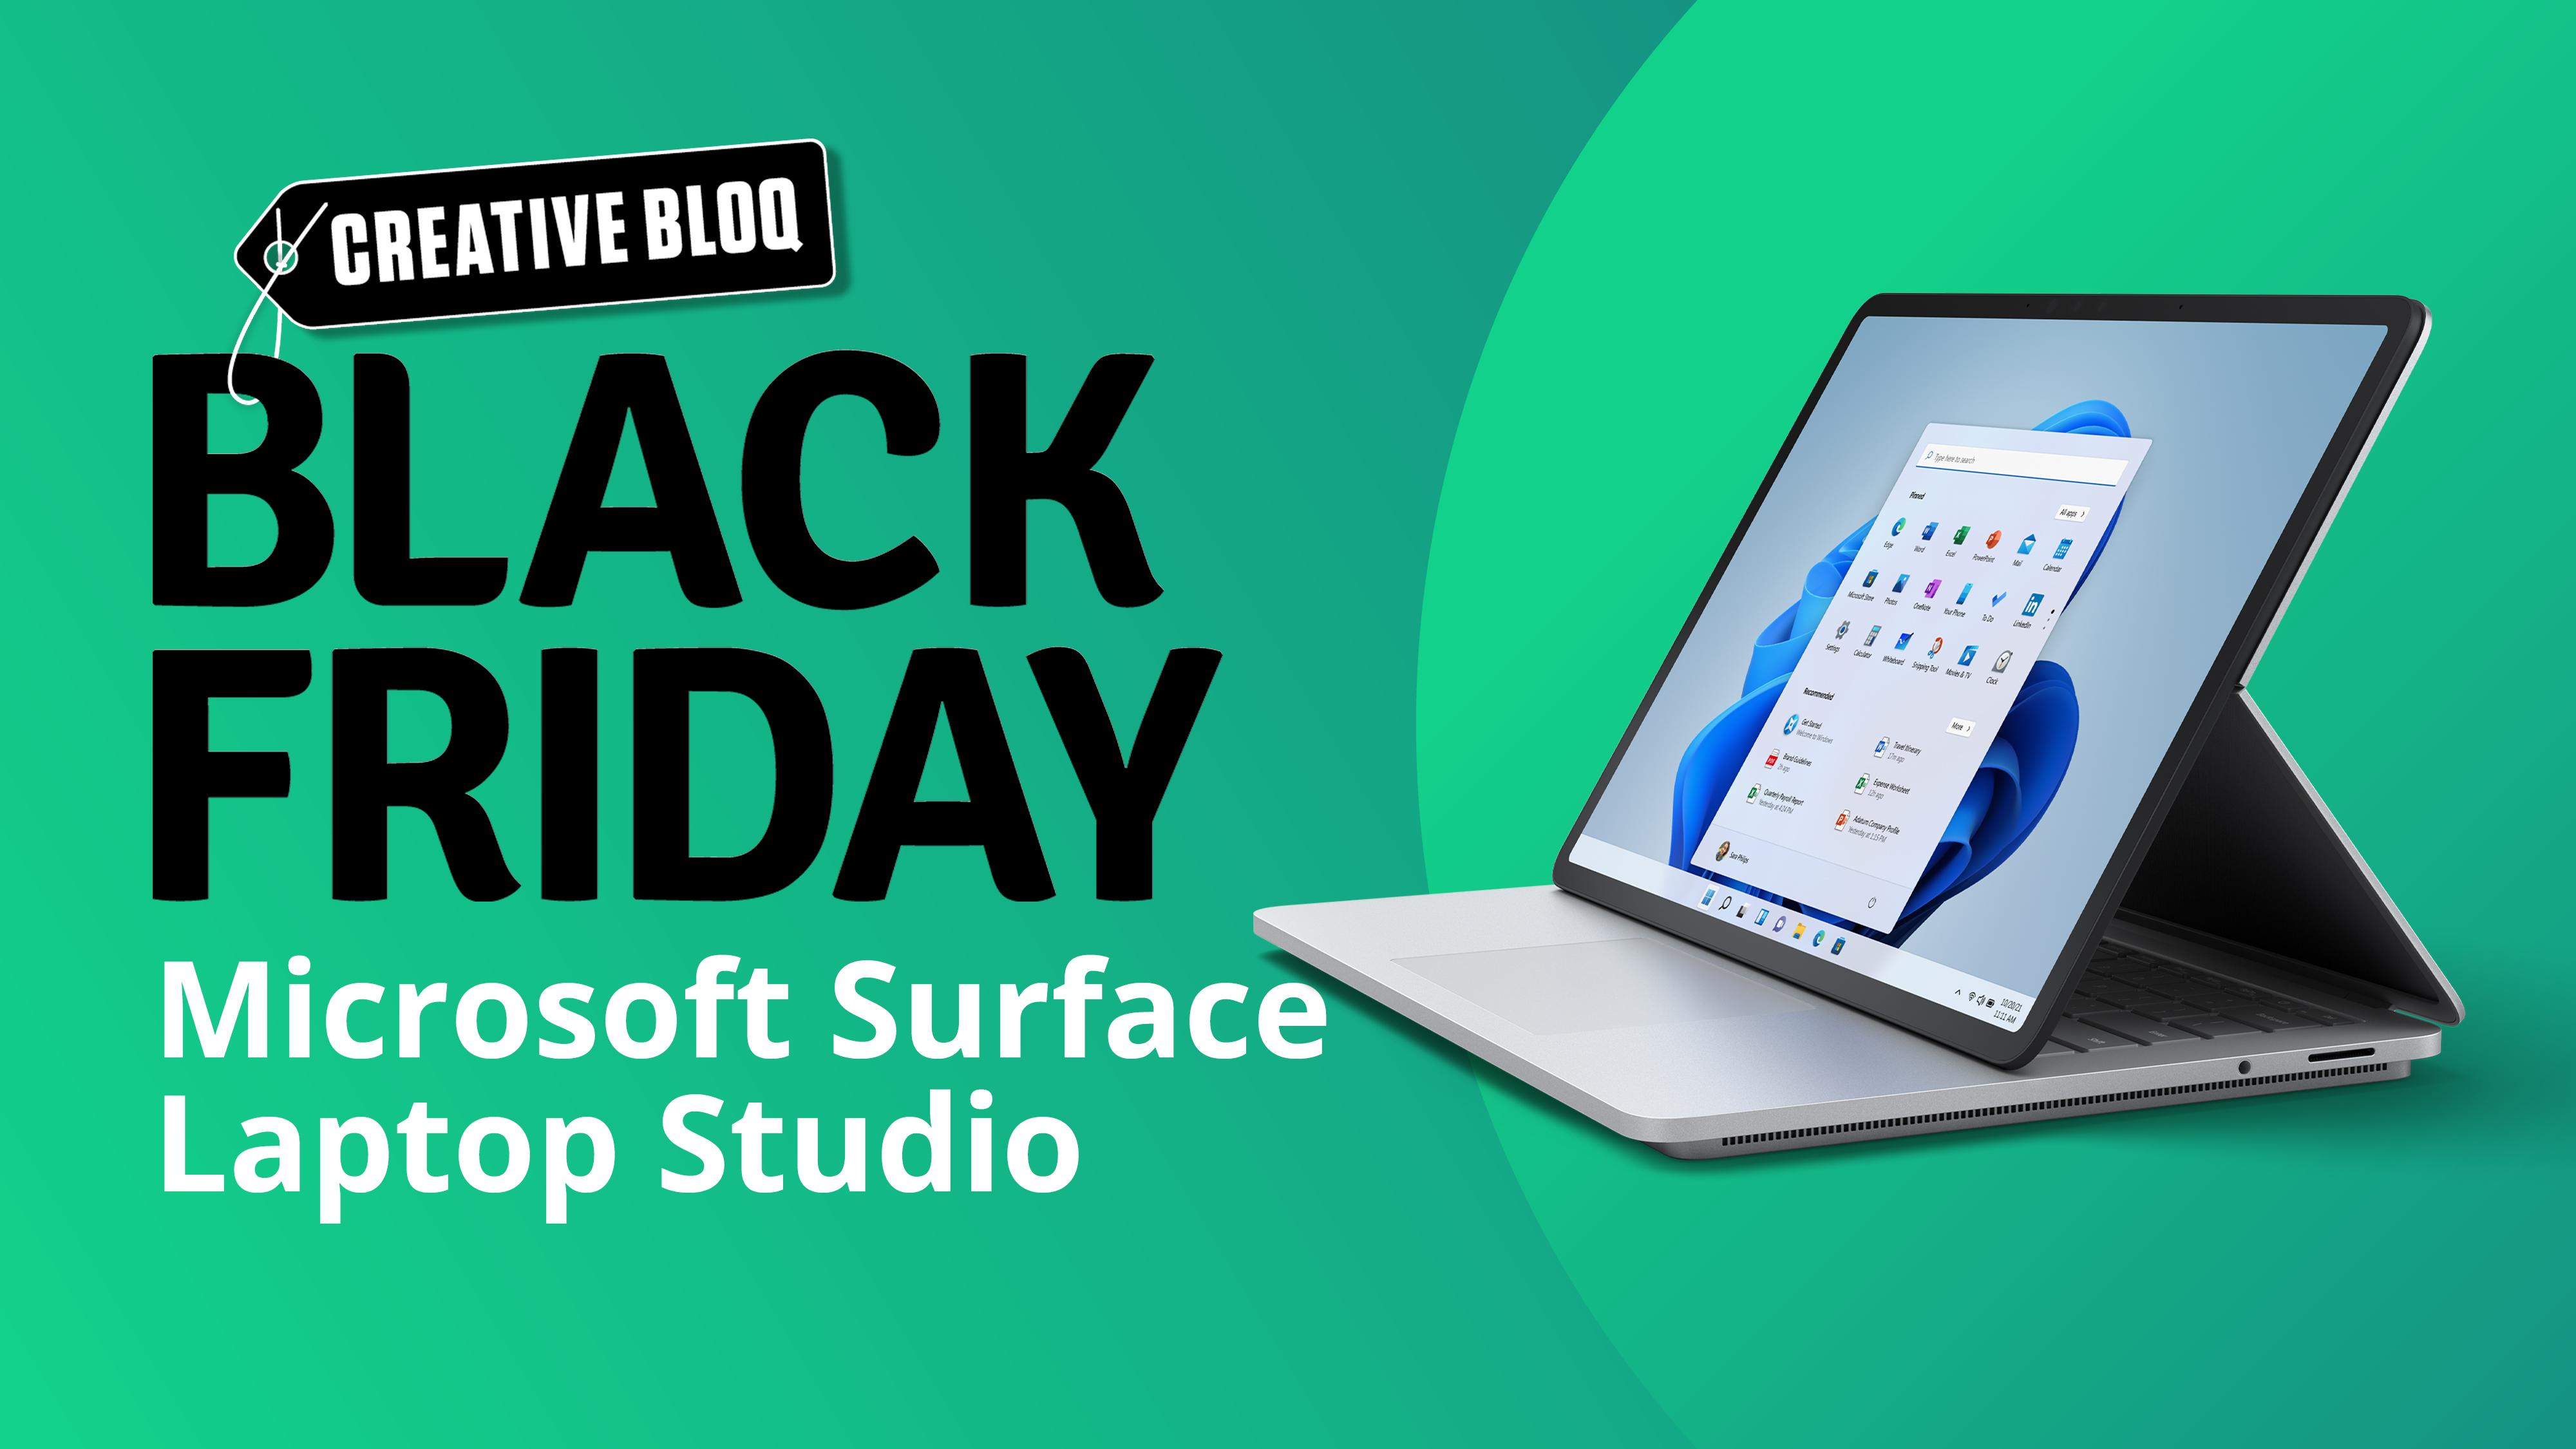 An image of Microsoft Black Friday deals, with a Microsoft Surface Laptop Studio on a green background